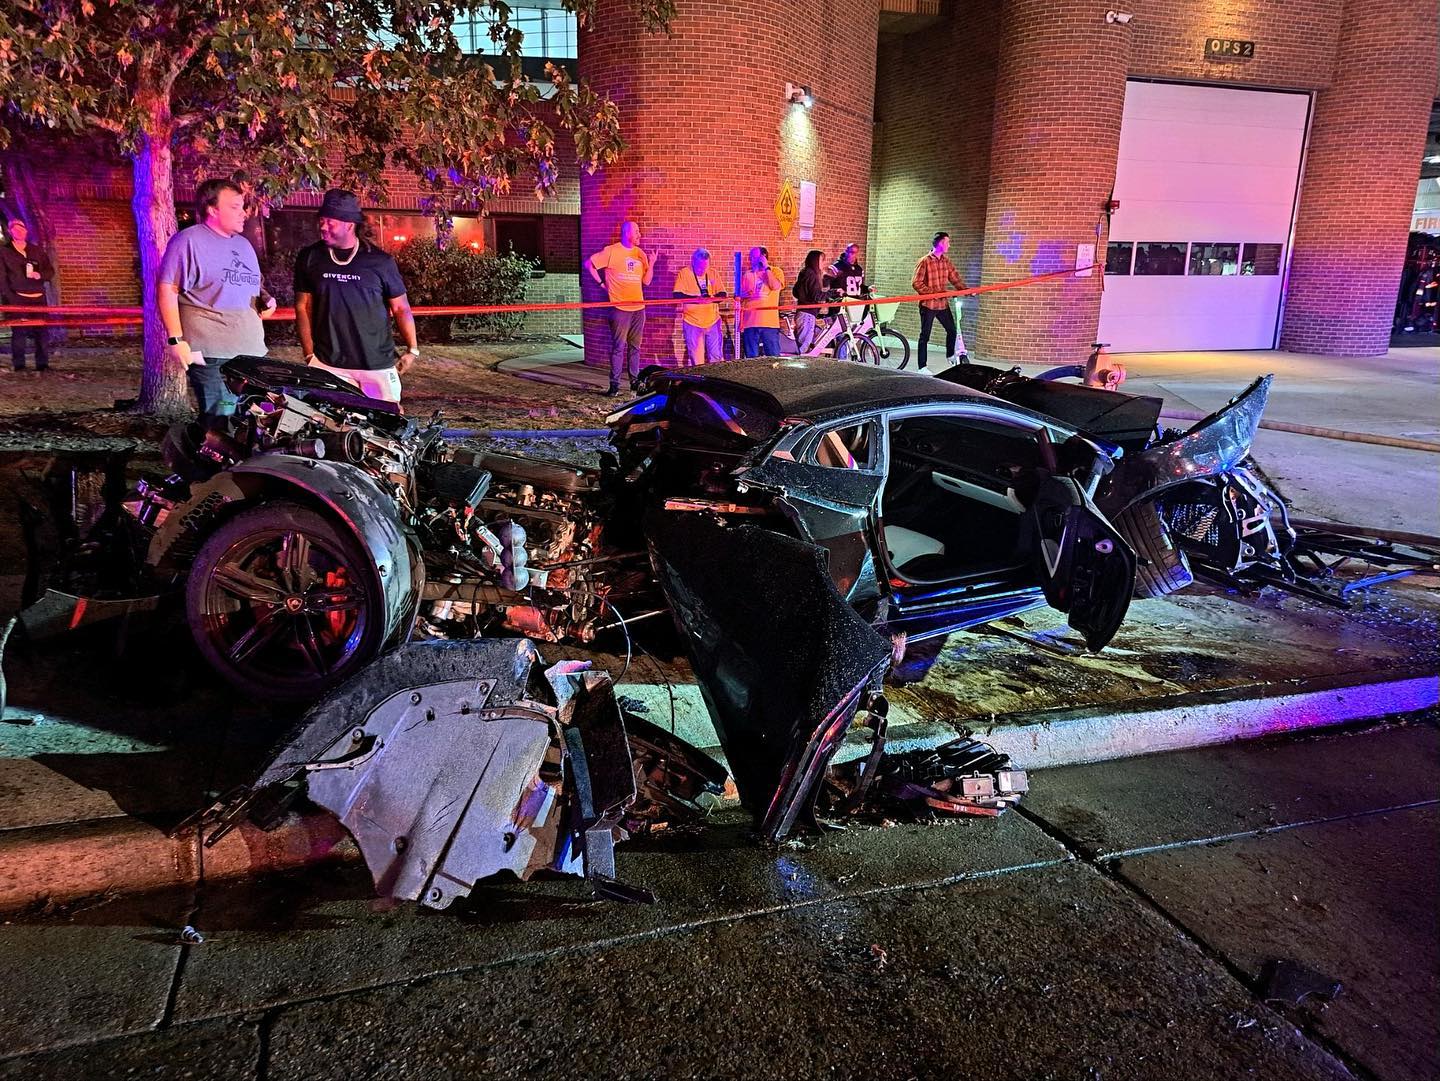 Two Lamborghinis crash, one catches fire in front of Denver fire station